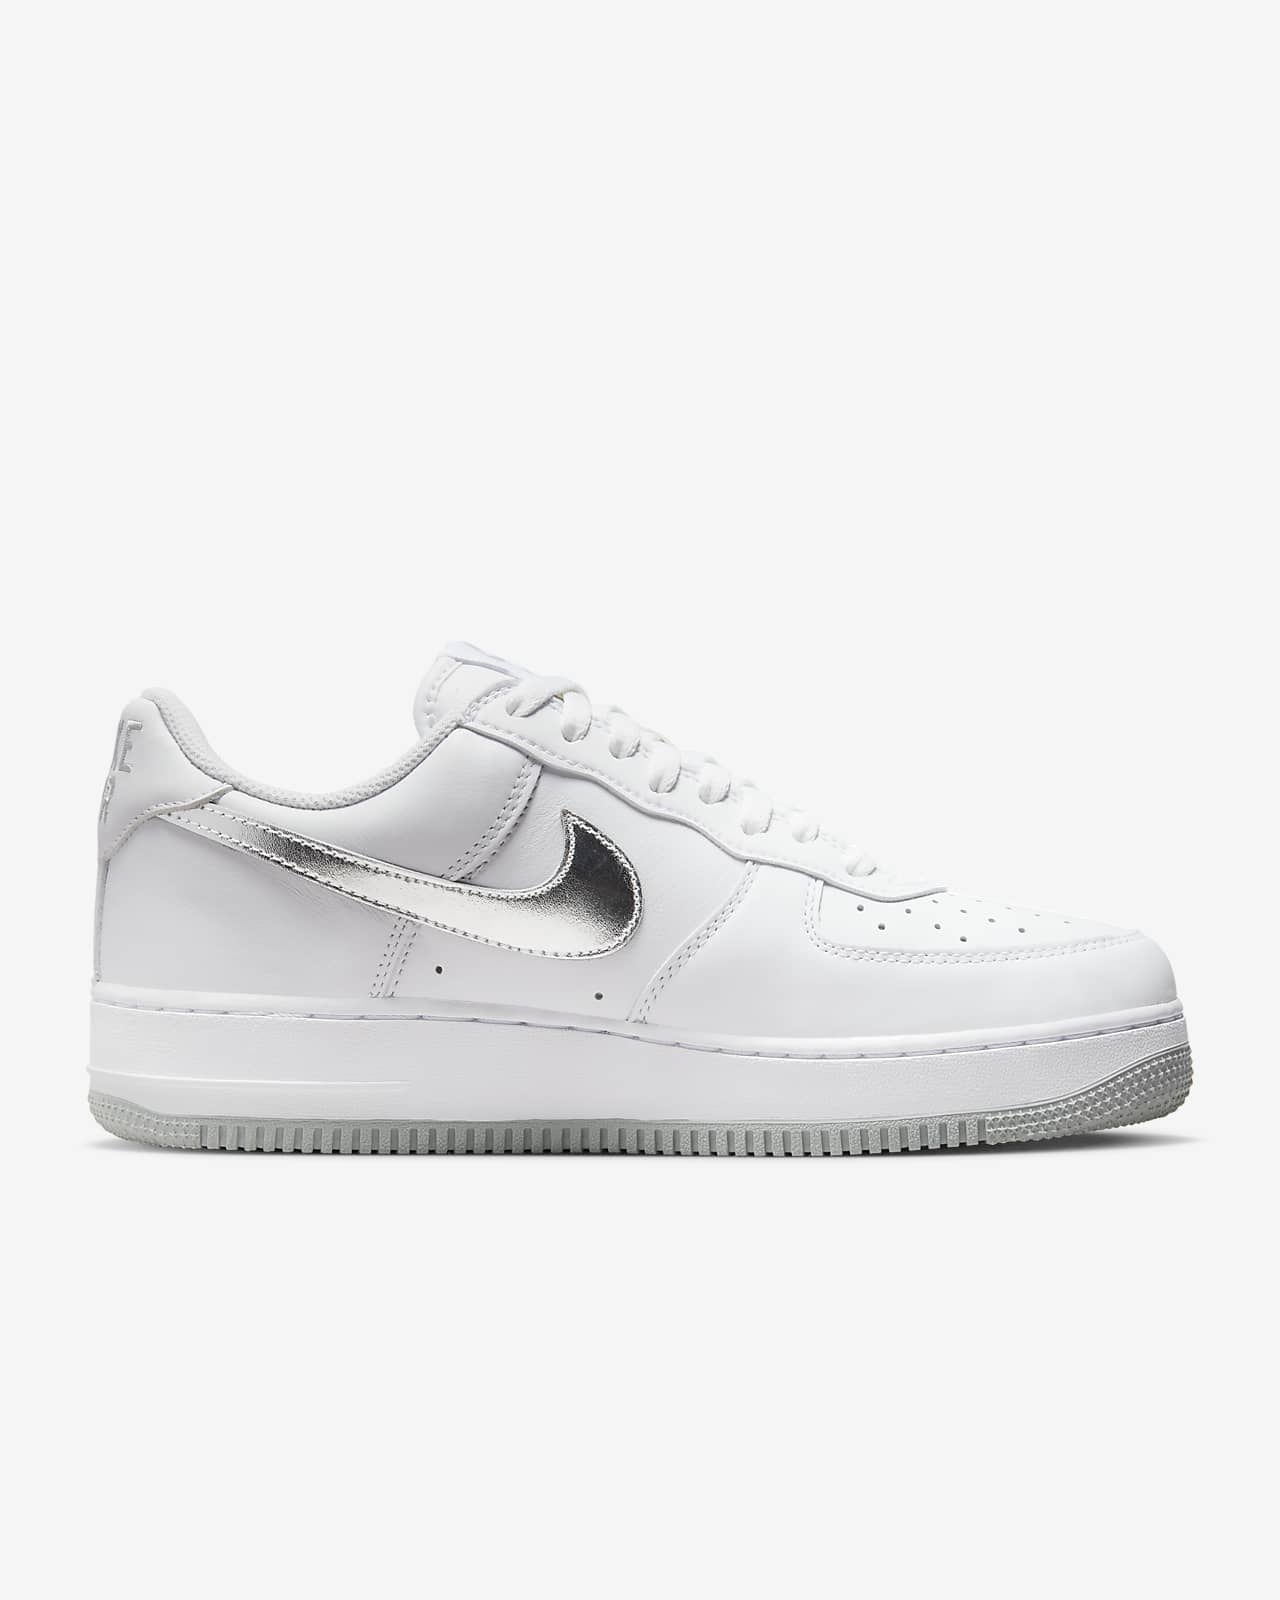 Nike Men's Air Force 1 Low Shoes